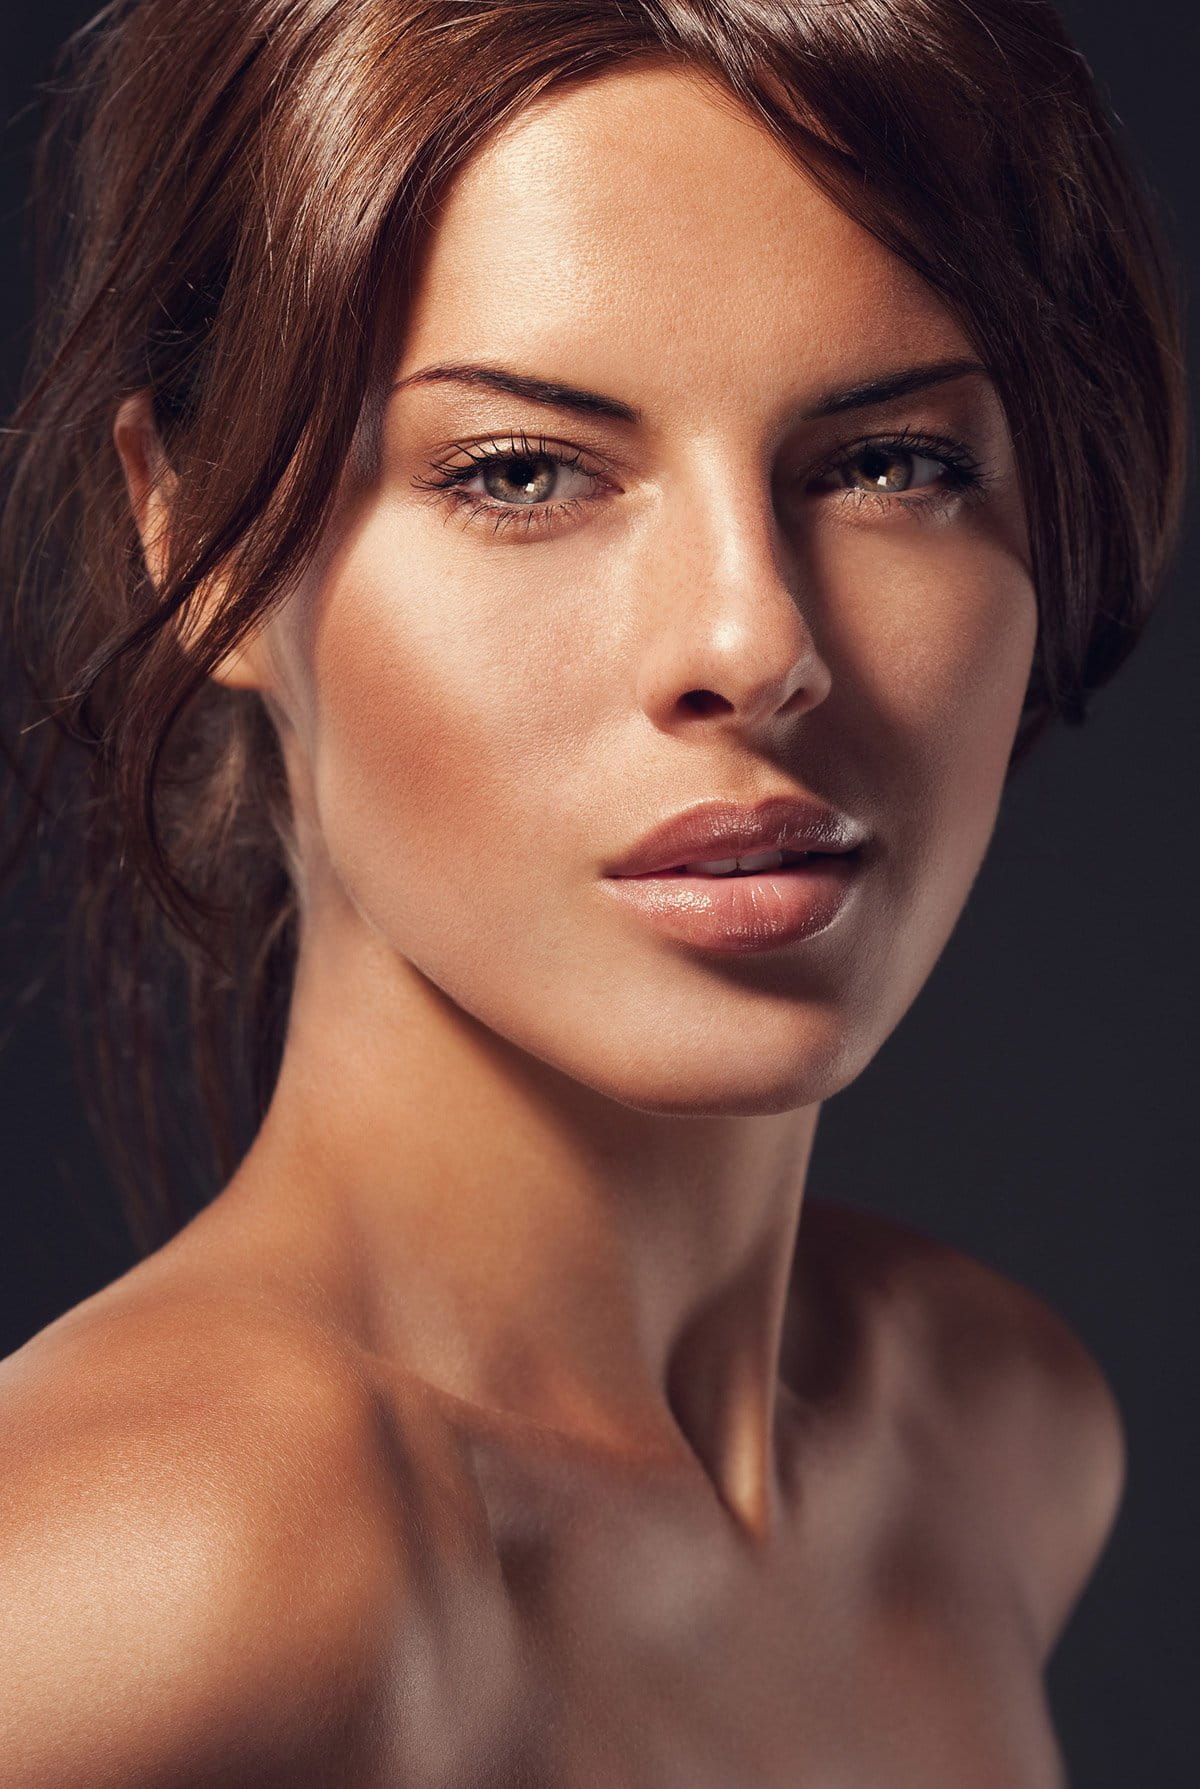 Face Lift patient model with bare shoulders